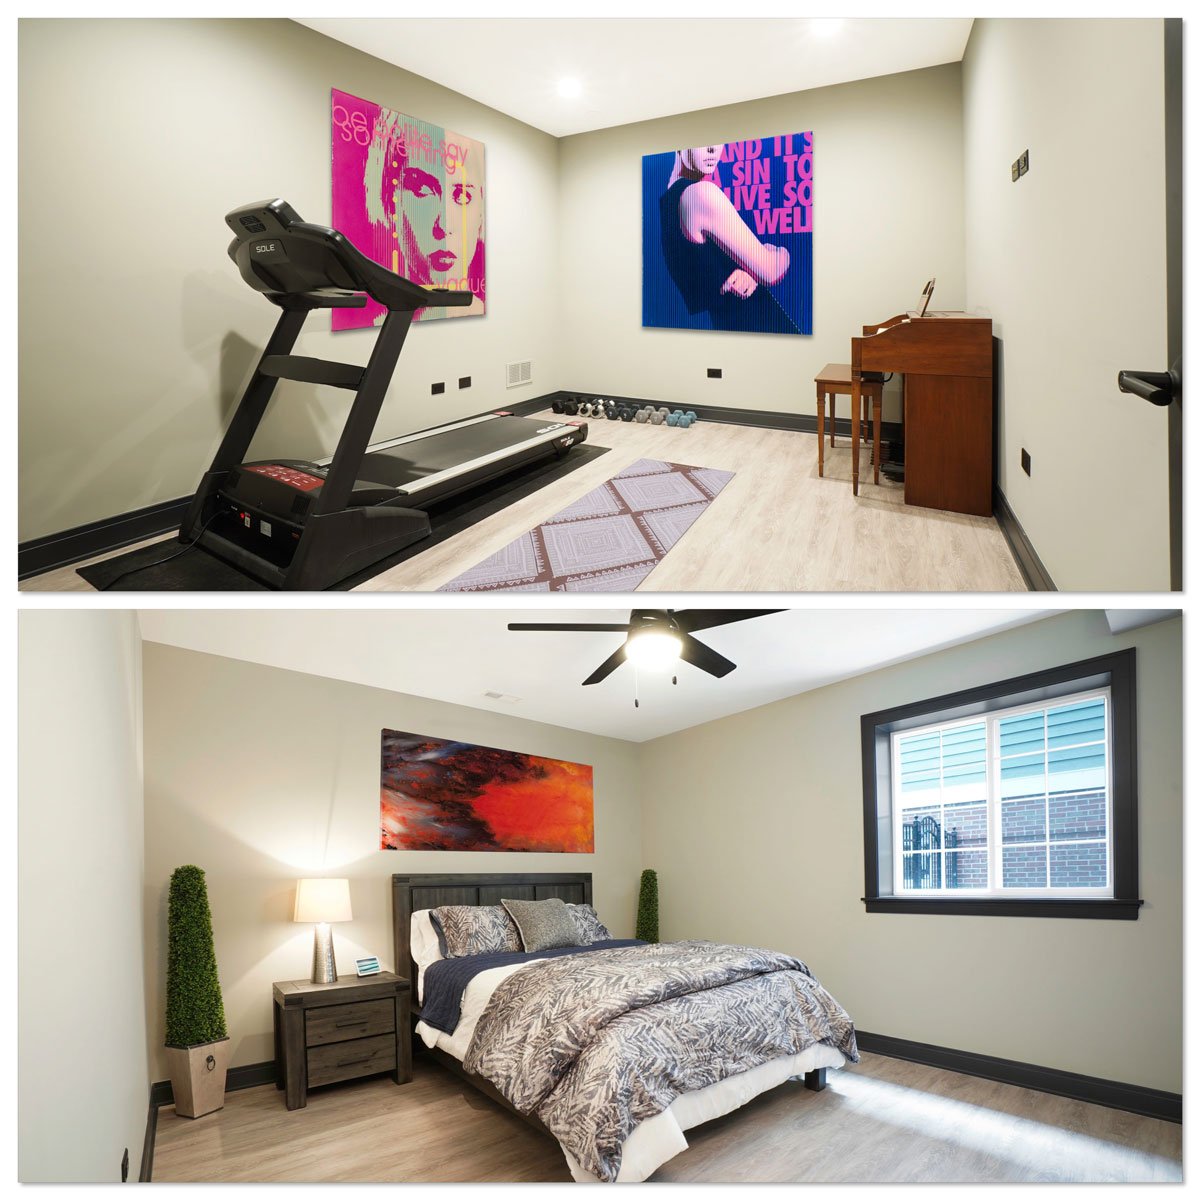 Basement remodel with in-home gym and guest sleeping accomodations